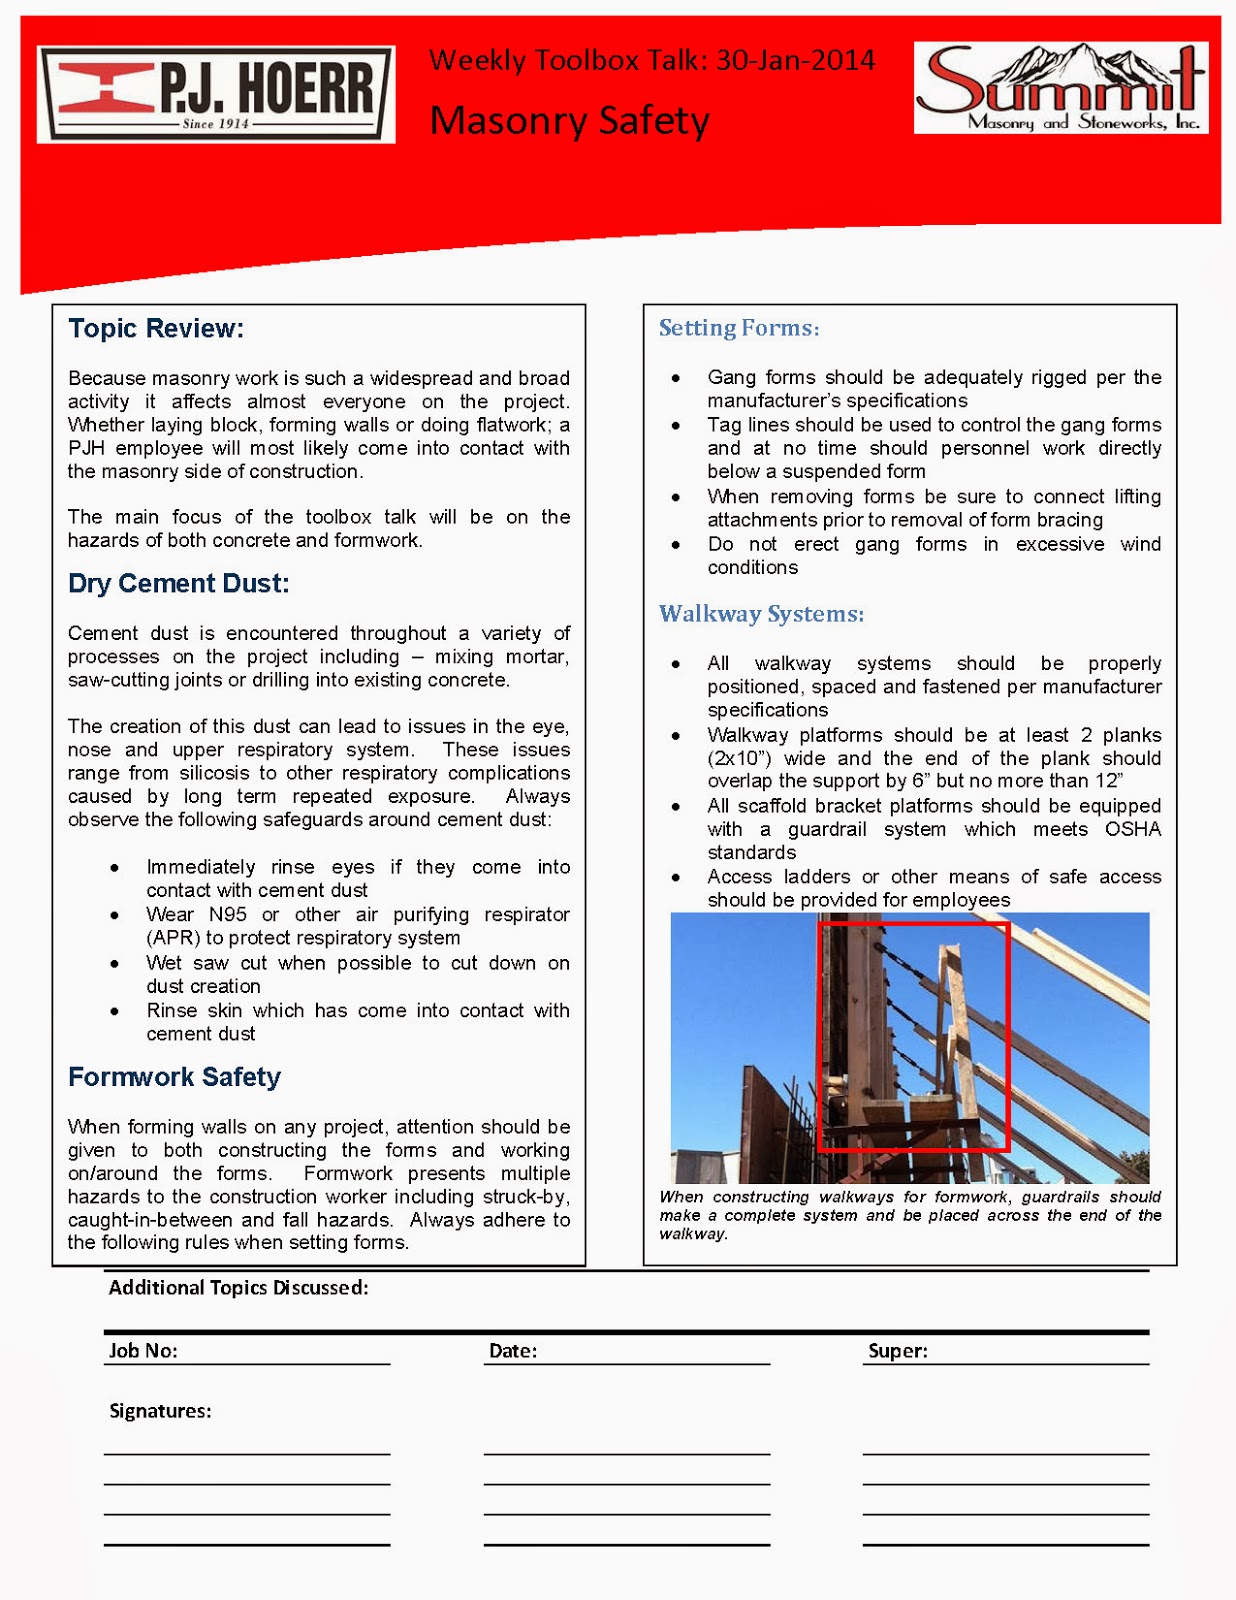 general-construction-safety-form-toolbox-talks-printable-free-plmhouses